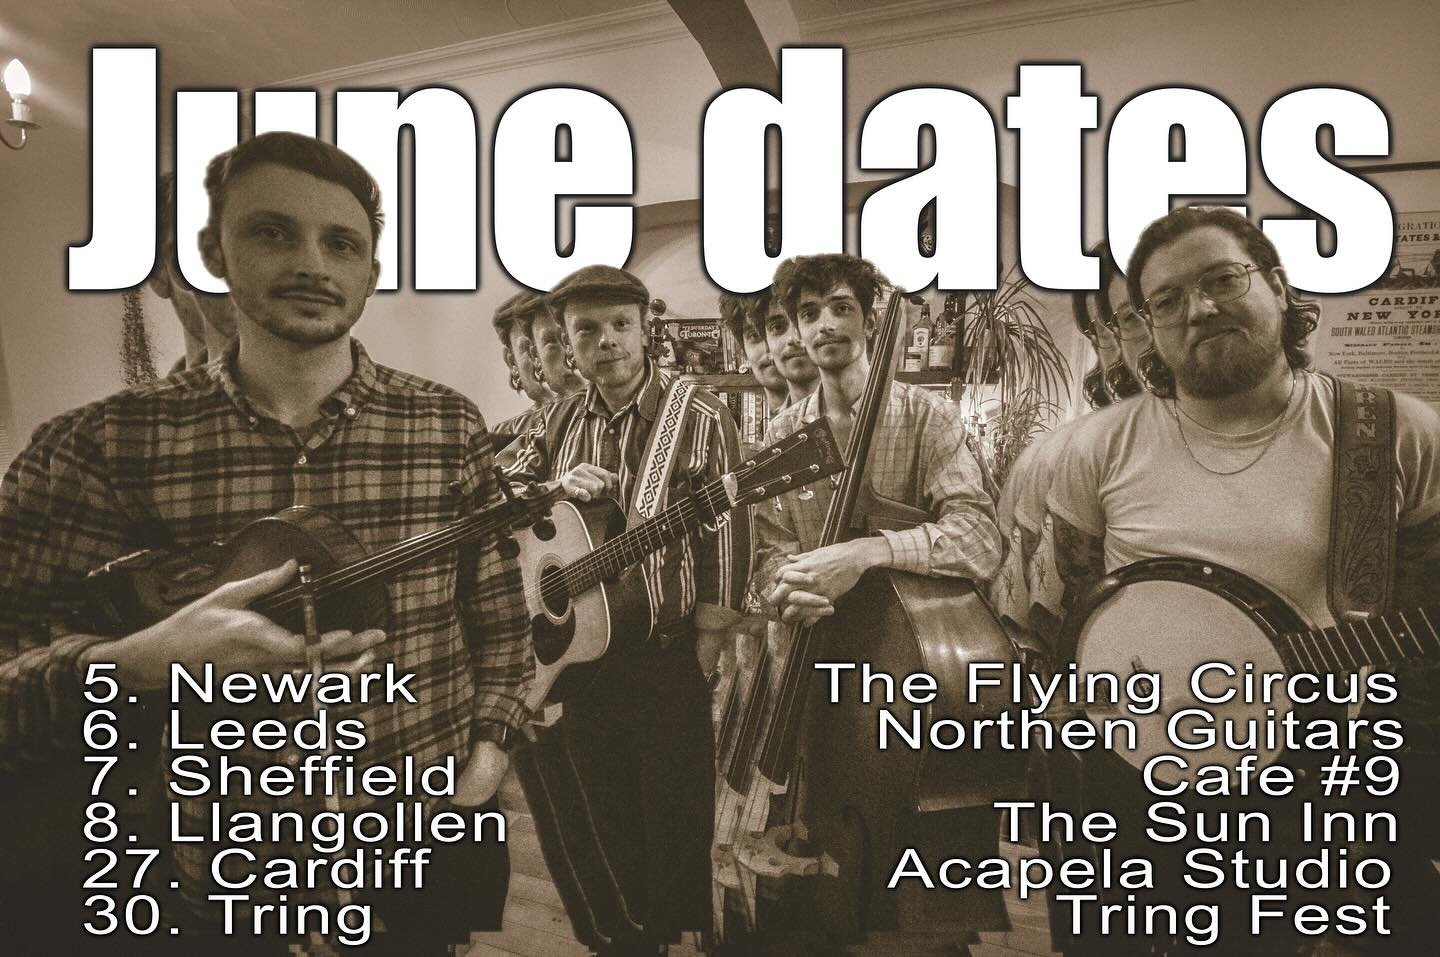 We are getting close to our summer touring with some great dates in June! 

Who&rsquo;s coming? You&rsquo;ll find us at
@theflyingcircusnewark 
@northernguitarsuk 
@cafe9 
@suninnllangollen 
@acapelastudiosofficial 

#blŵgras